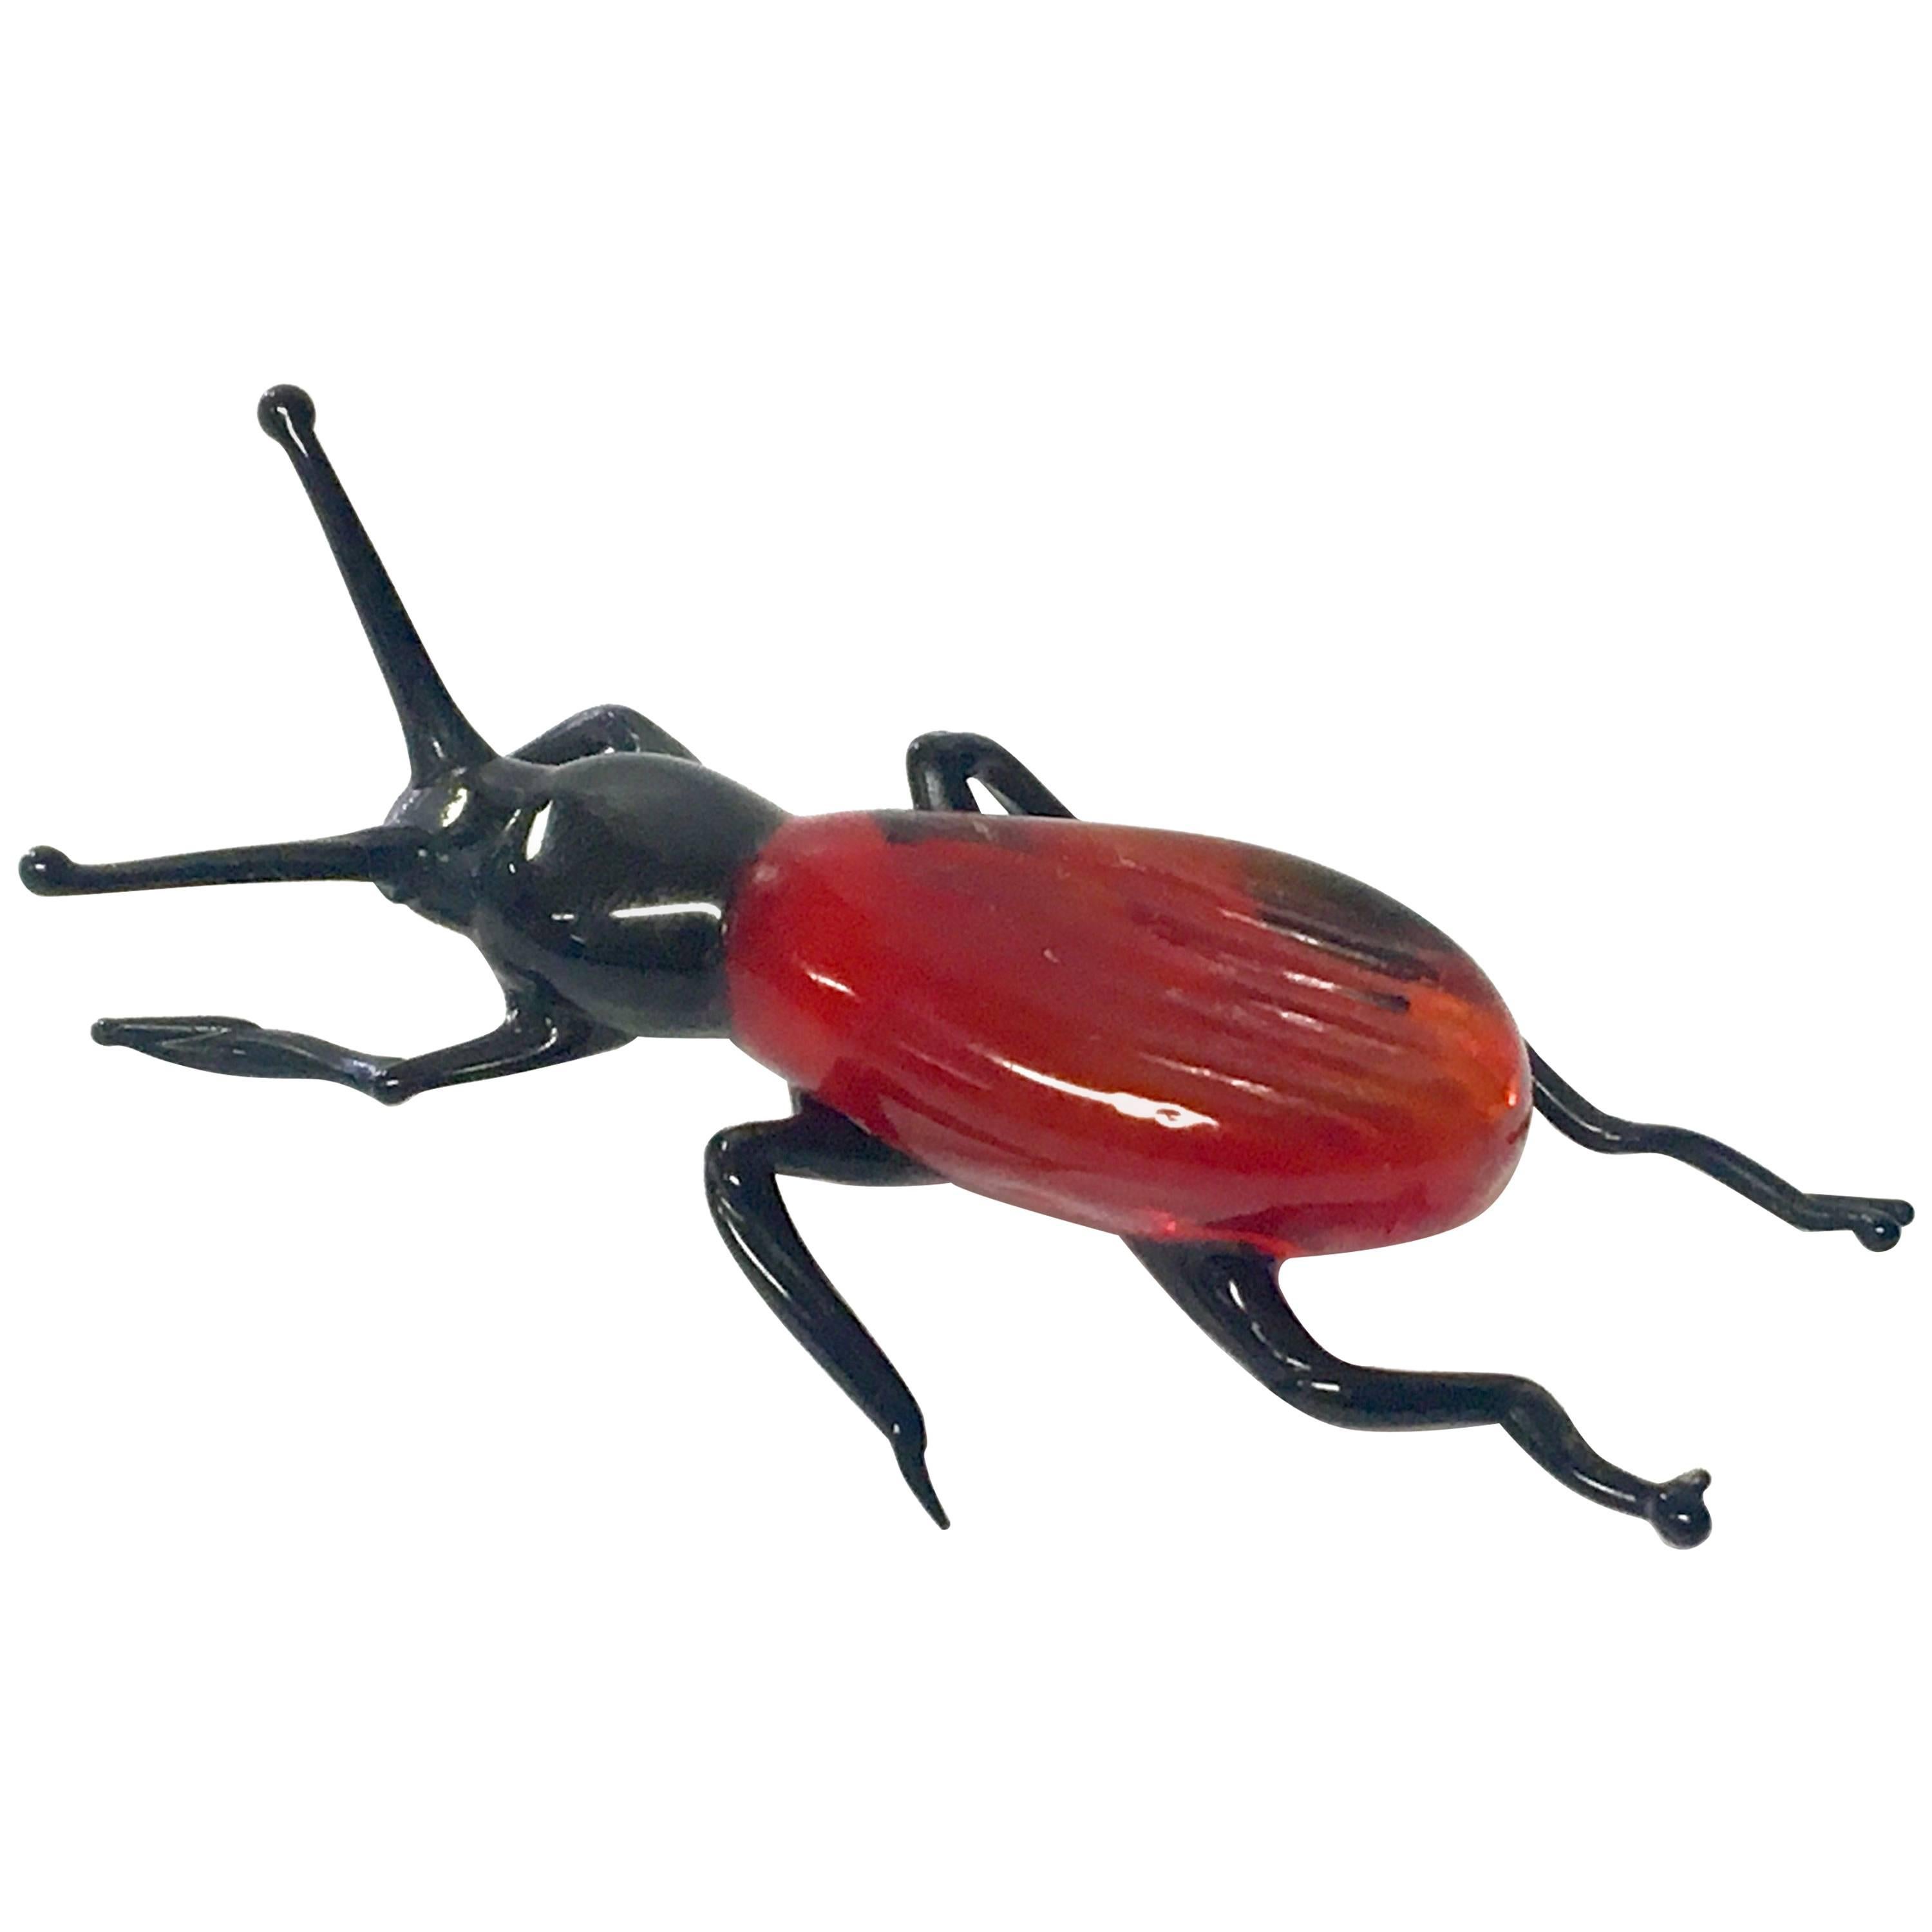 Small Beetle or Insect Sculpture by Murano Glass Italian